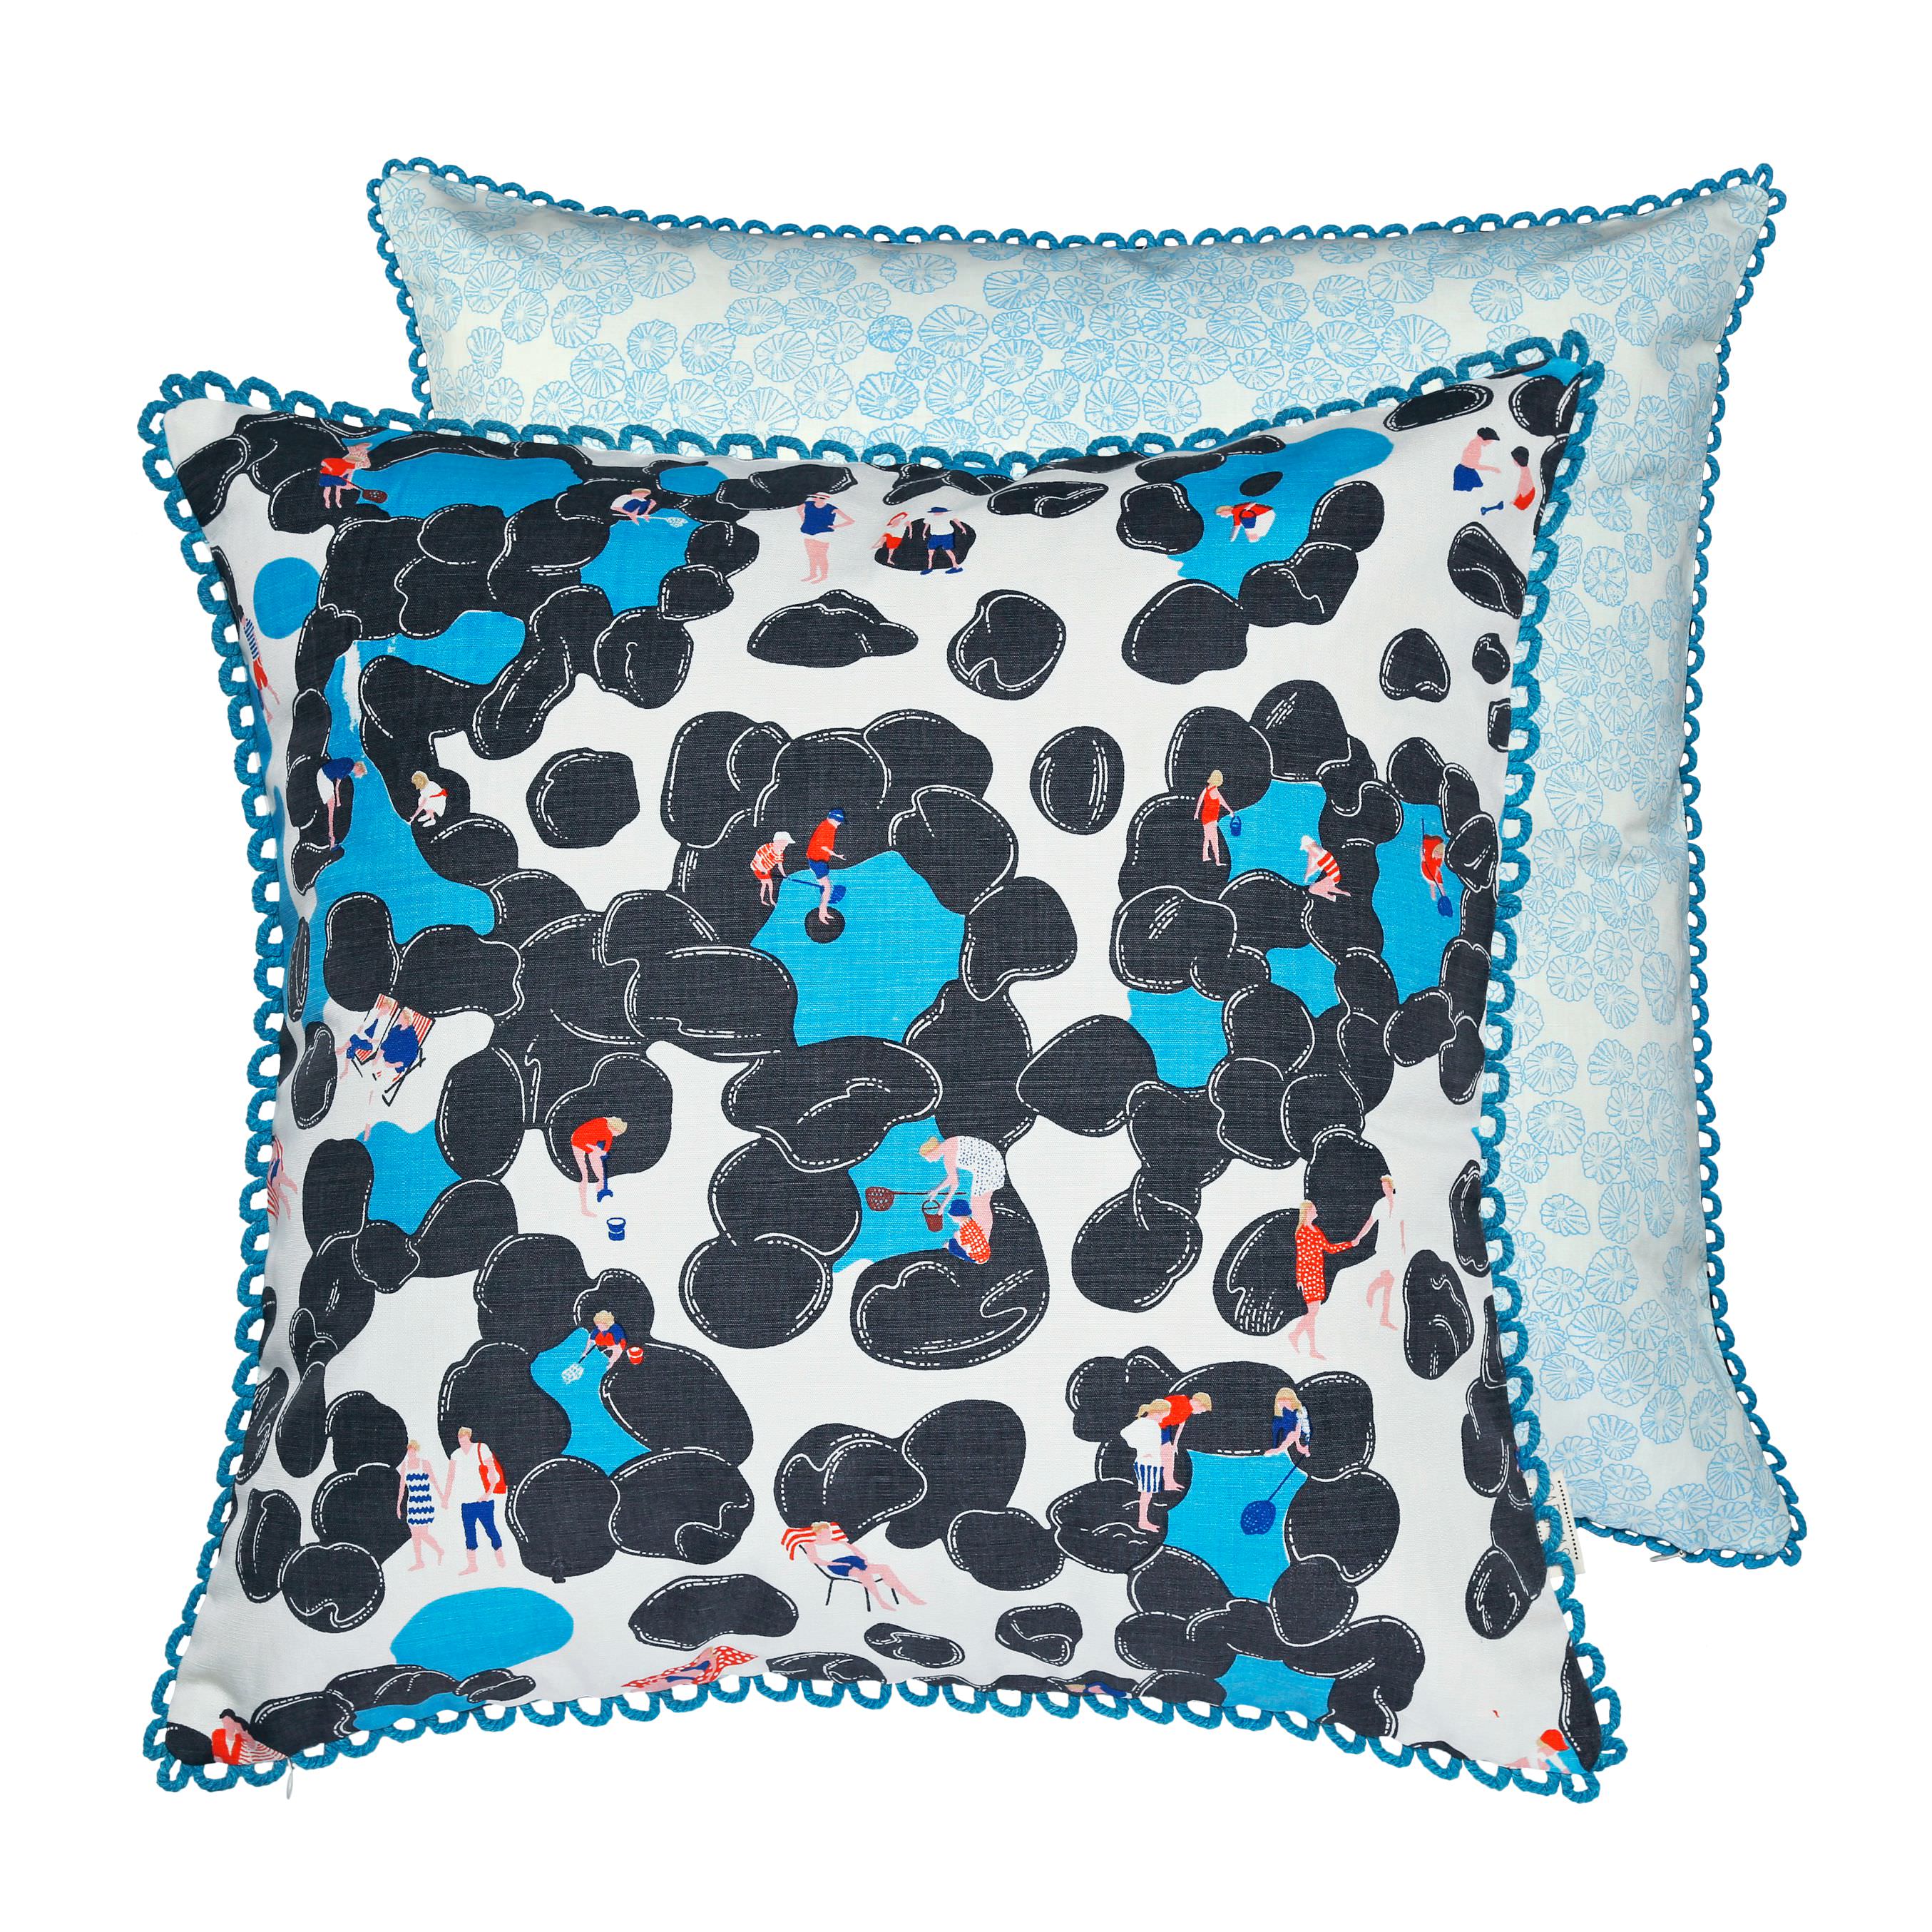 London_Design_Festival_2015_Safomasi_Salcombe_Collection_Rockpool_Cushion_45x45_featured_on_Little_Big_Bell